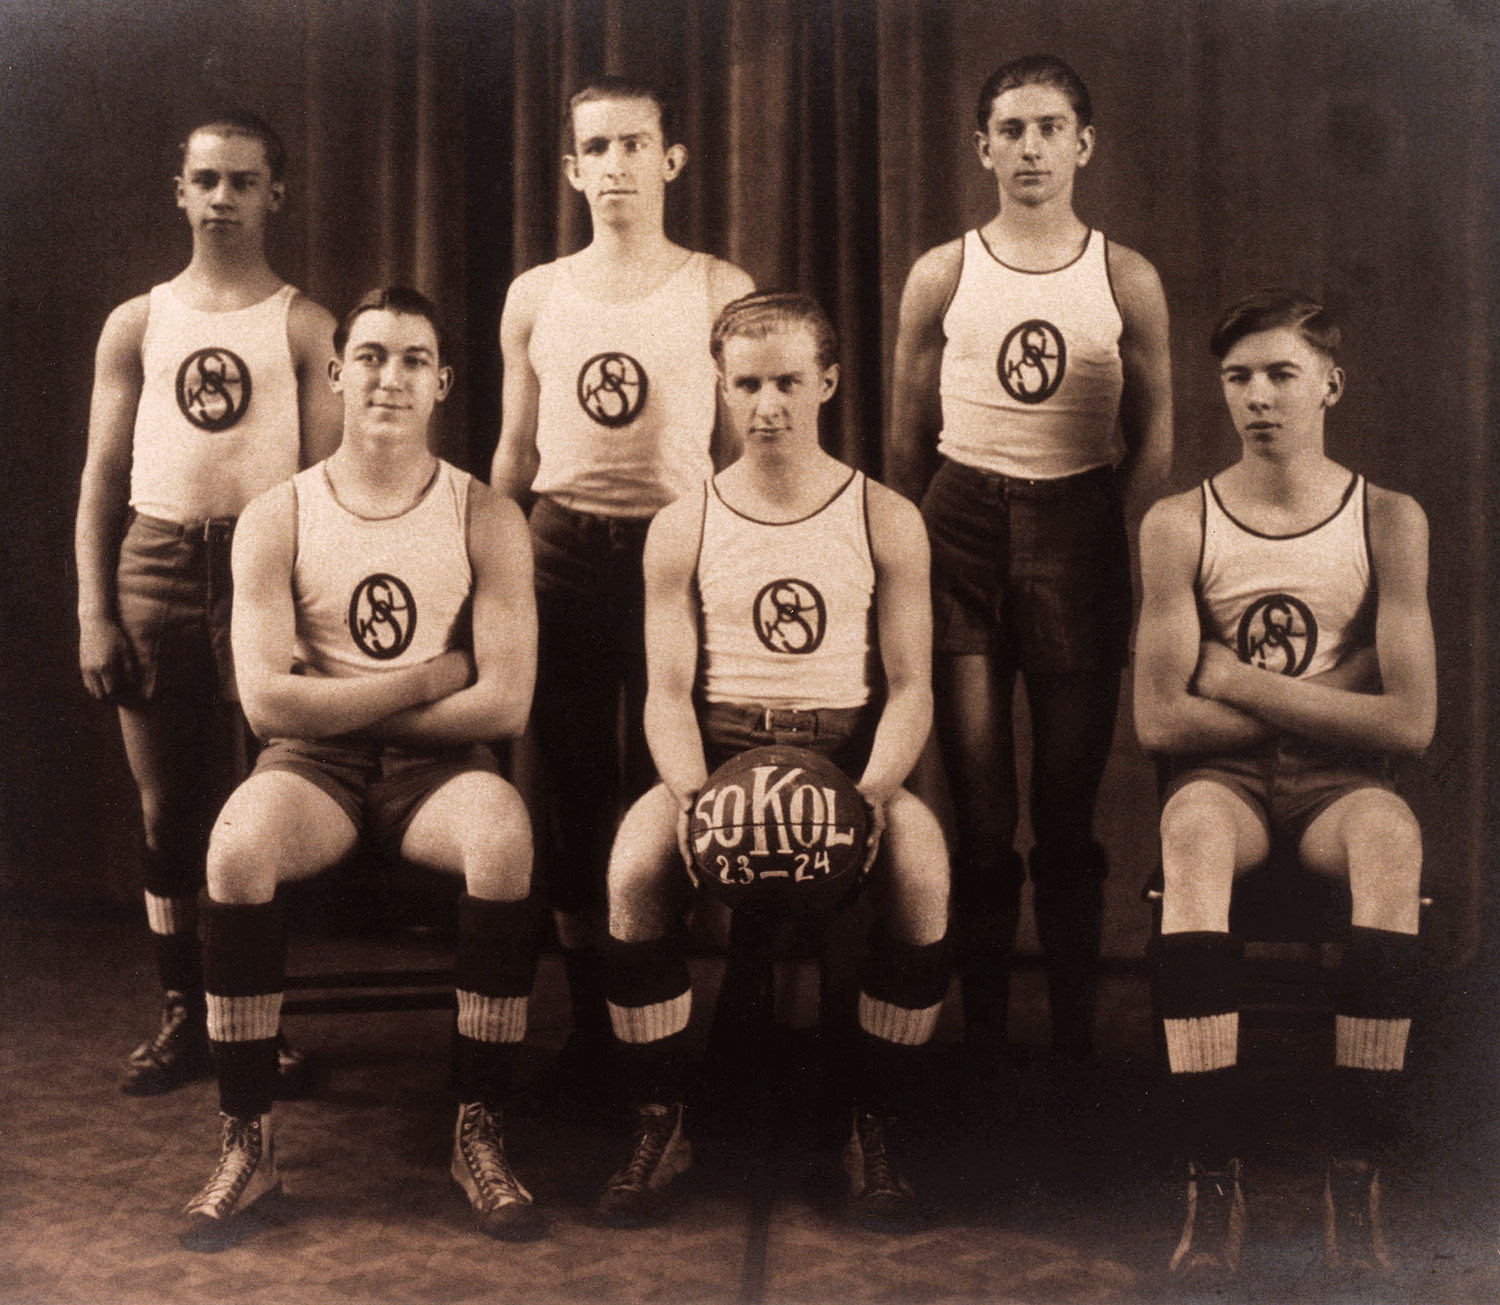 My dad Alois, (back row R) with his Sokol basketball teammates, 1923-1924. East St, Louis Czech Hall. The Sokol movement (from the Slavic word for falcon) is a youth sport movement and gymnastics organization first founded in Prague, Czechoslovakia. American Sokol is alive and well in the U.S. View full size.